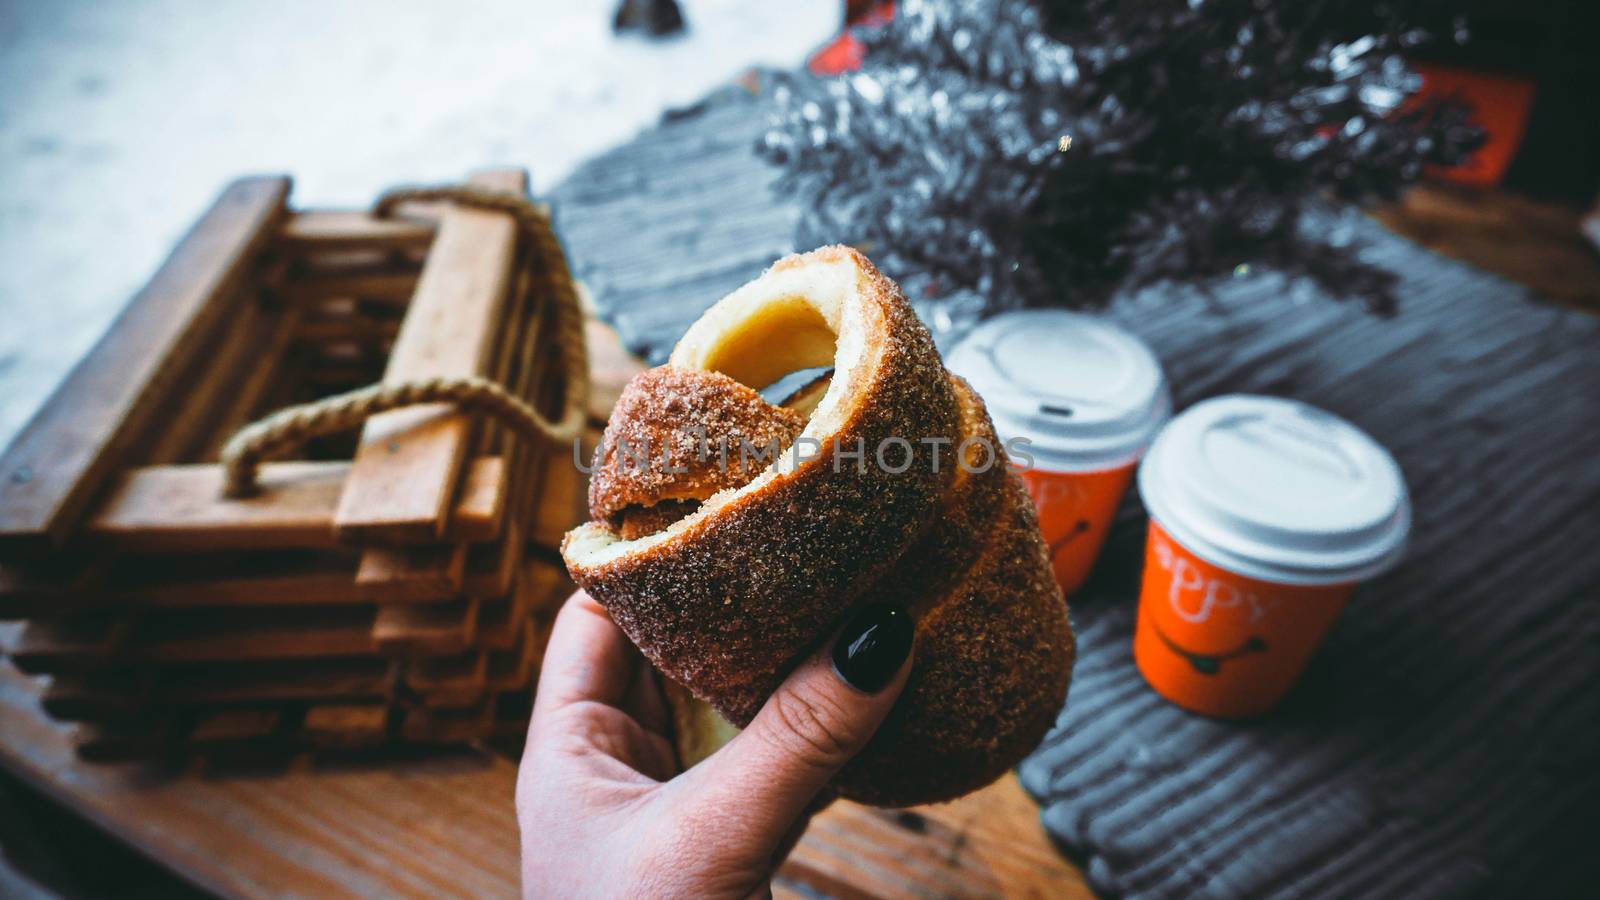 Woman holds in hand Trdlo or Trdelnik, it is a national street food of Prague by natali_brill